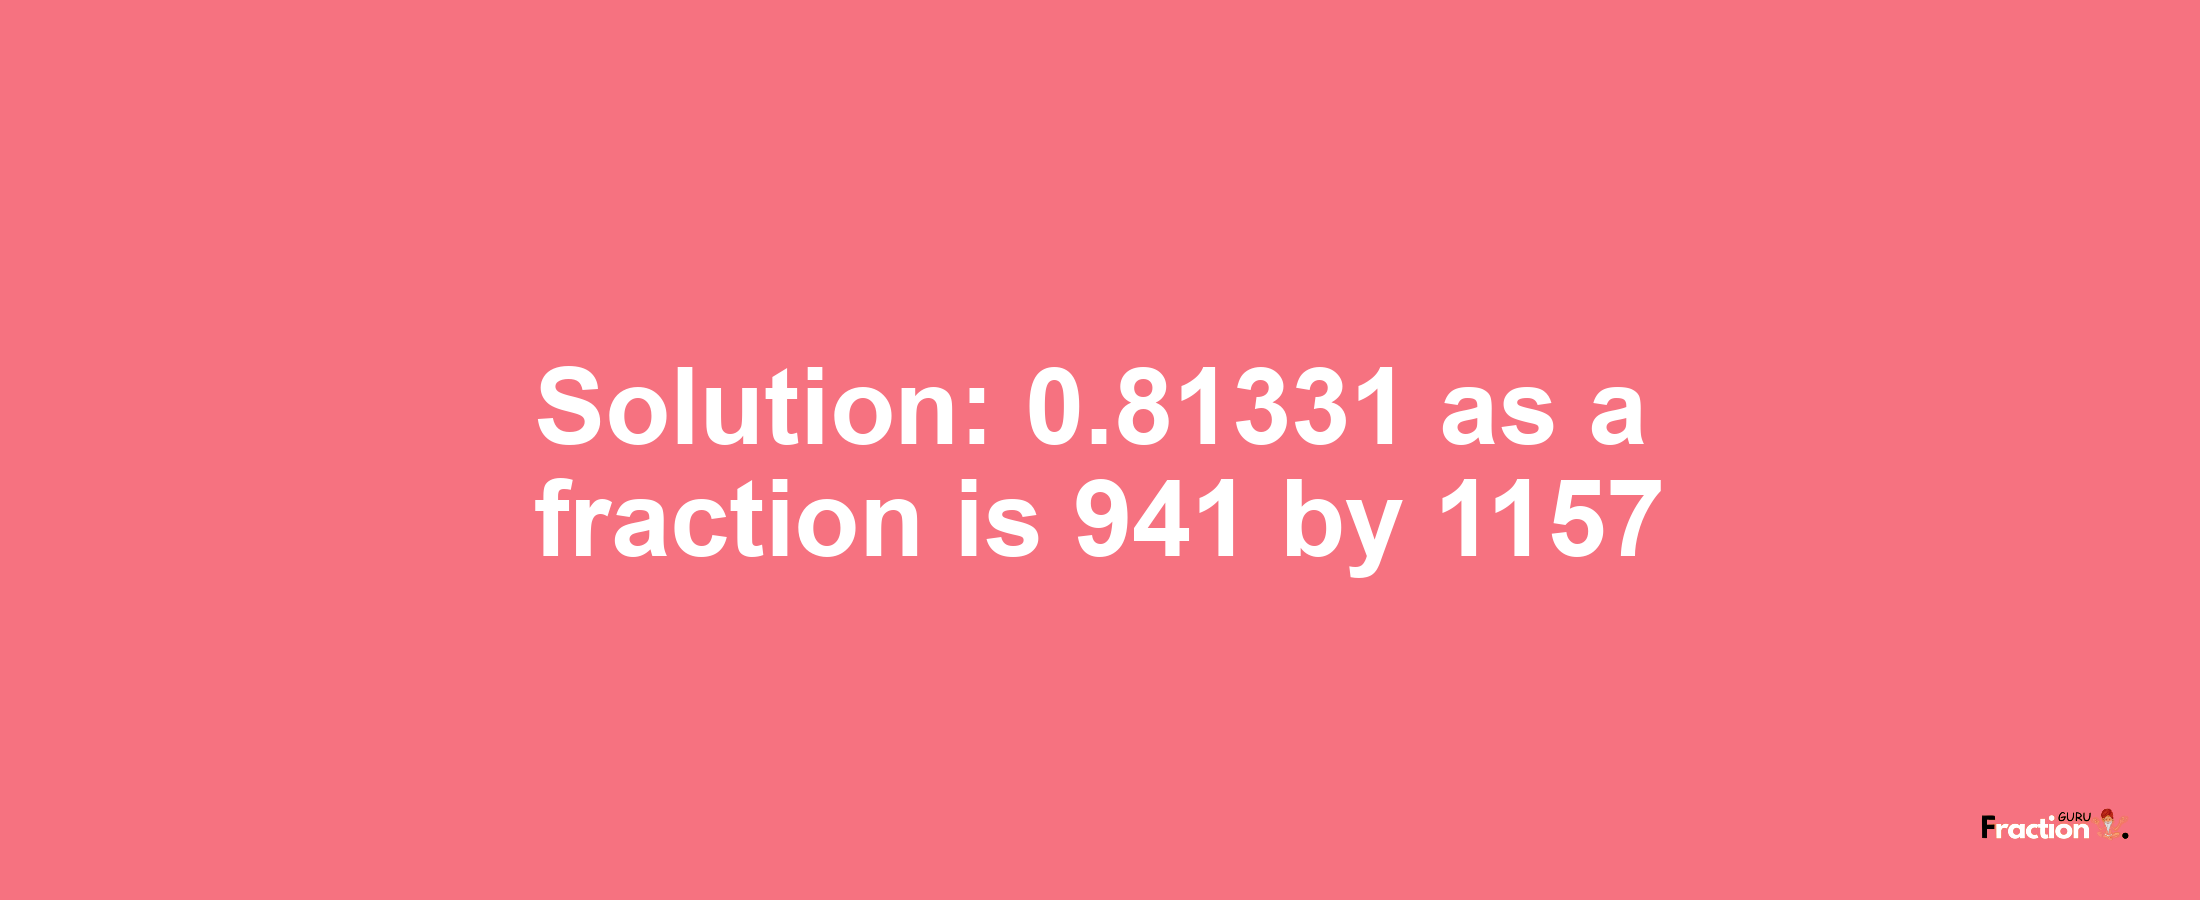 Solution:0.81331 as a fraction is 941/1157